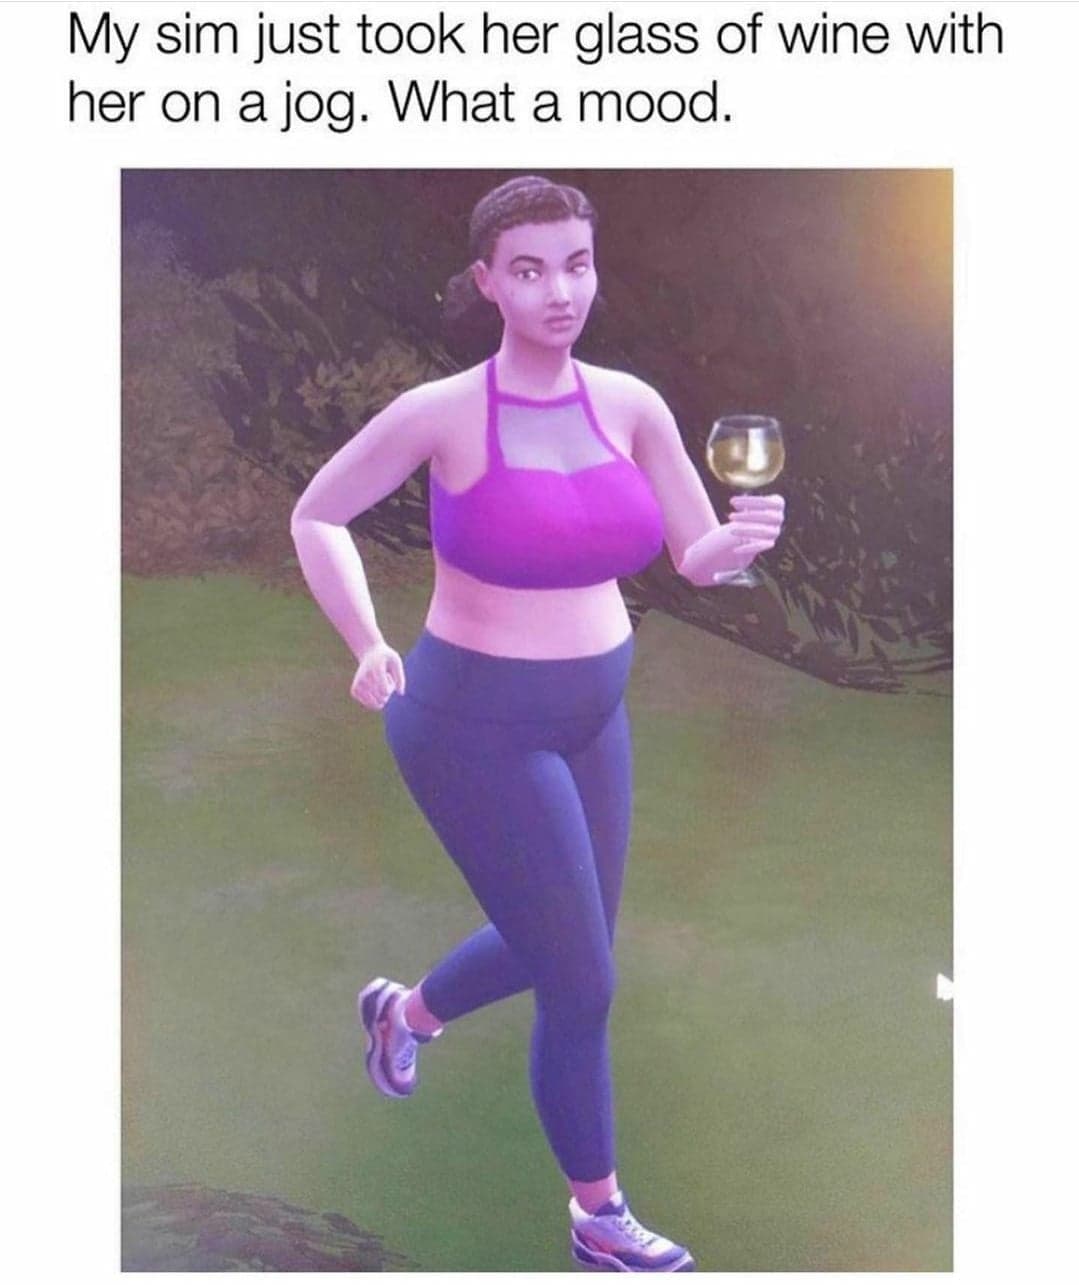 shoulder - My sim just took her glass of wine with her on a jog. What a mood.